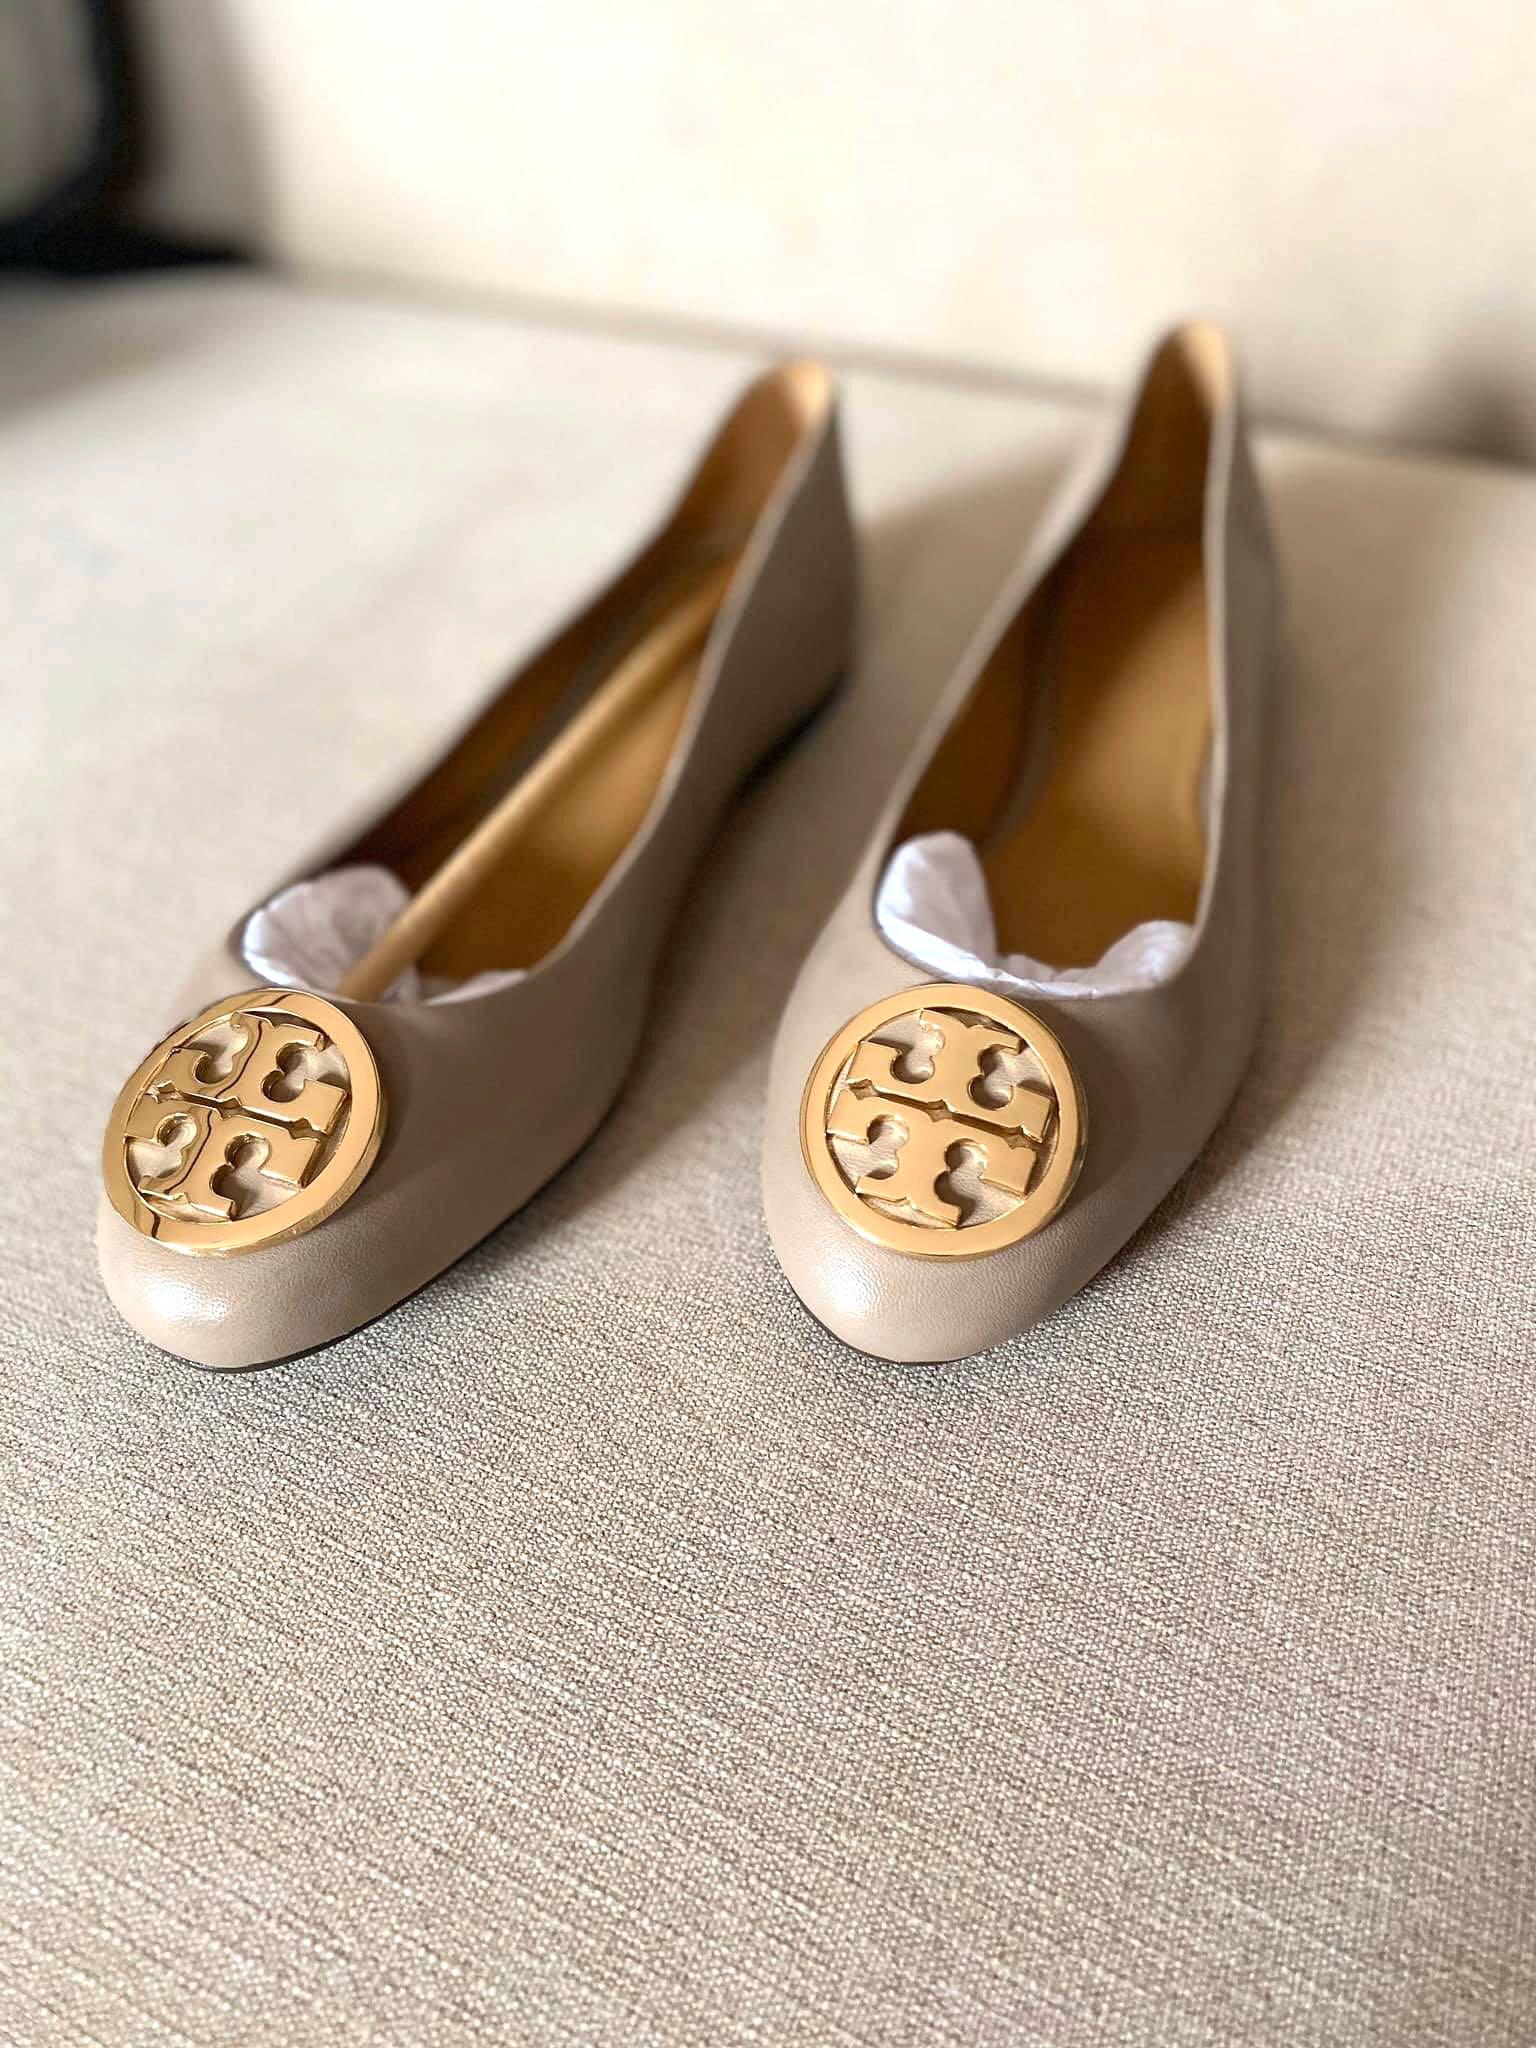 Tory Burch Ballet Flats Close Shoes Flats Size 7 from USA ??, Women's  Fashion, Footwear, Flats & Sandals on Carousell